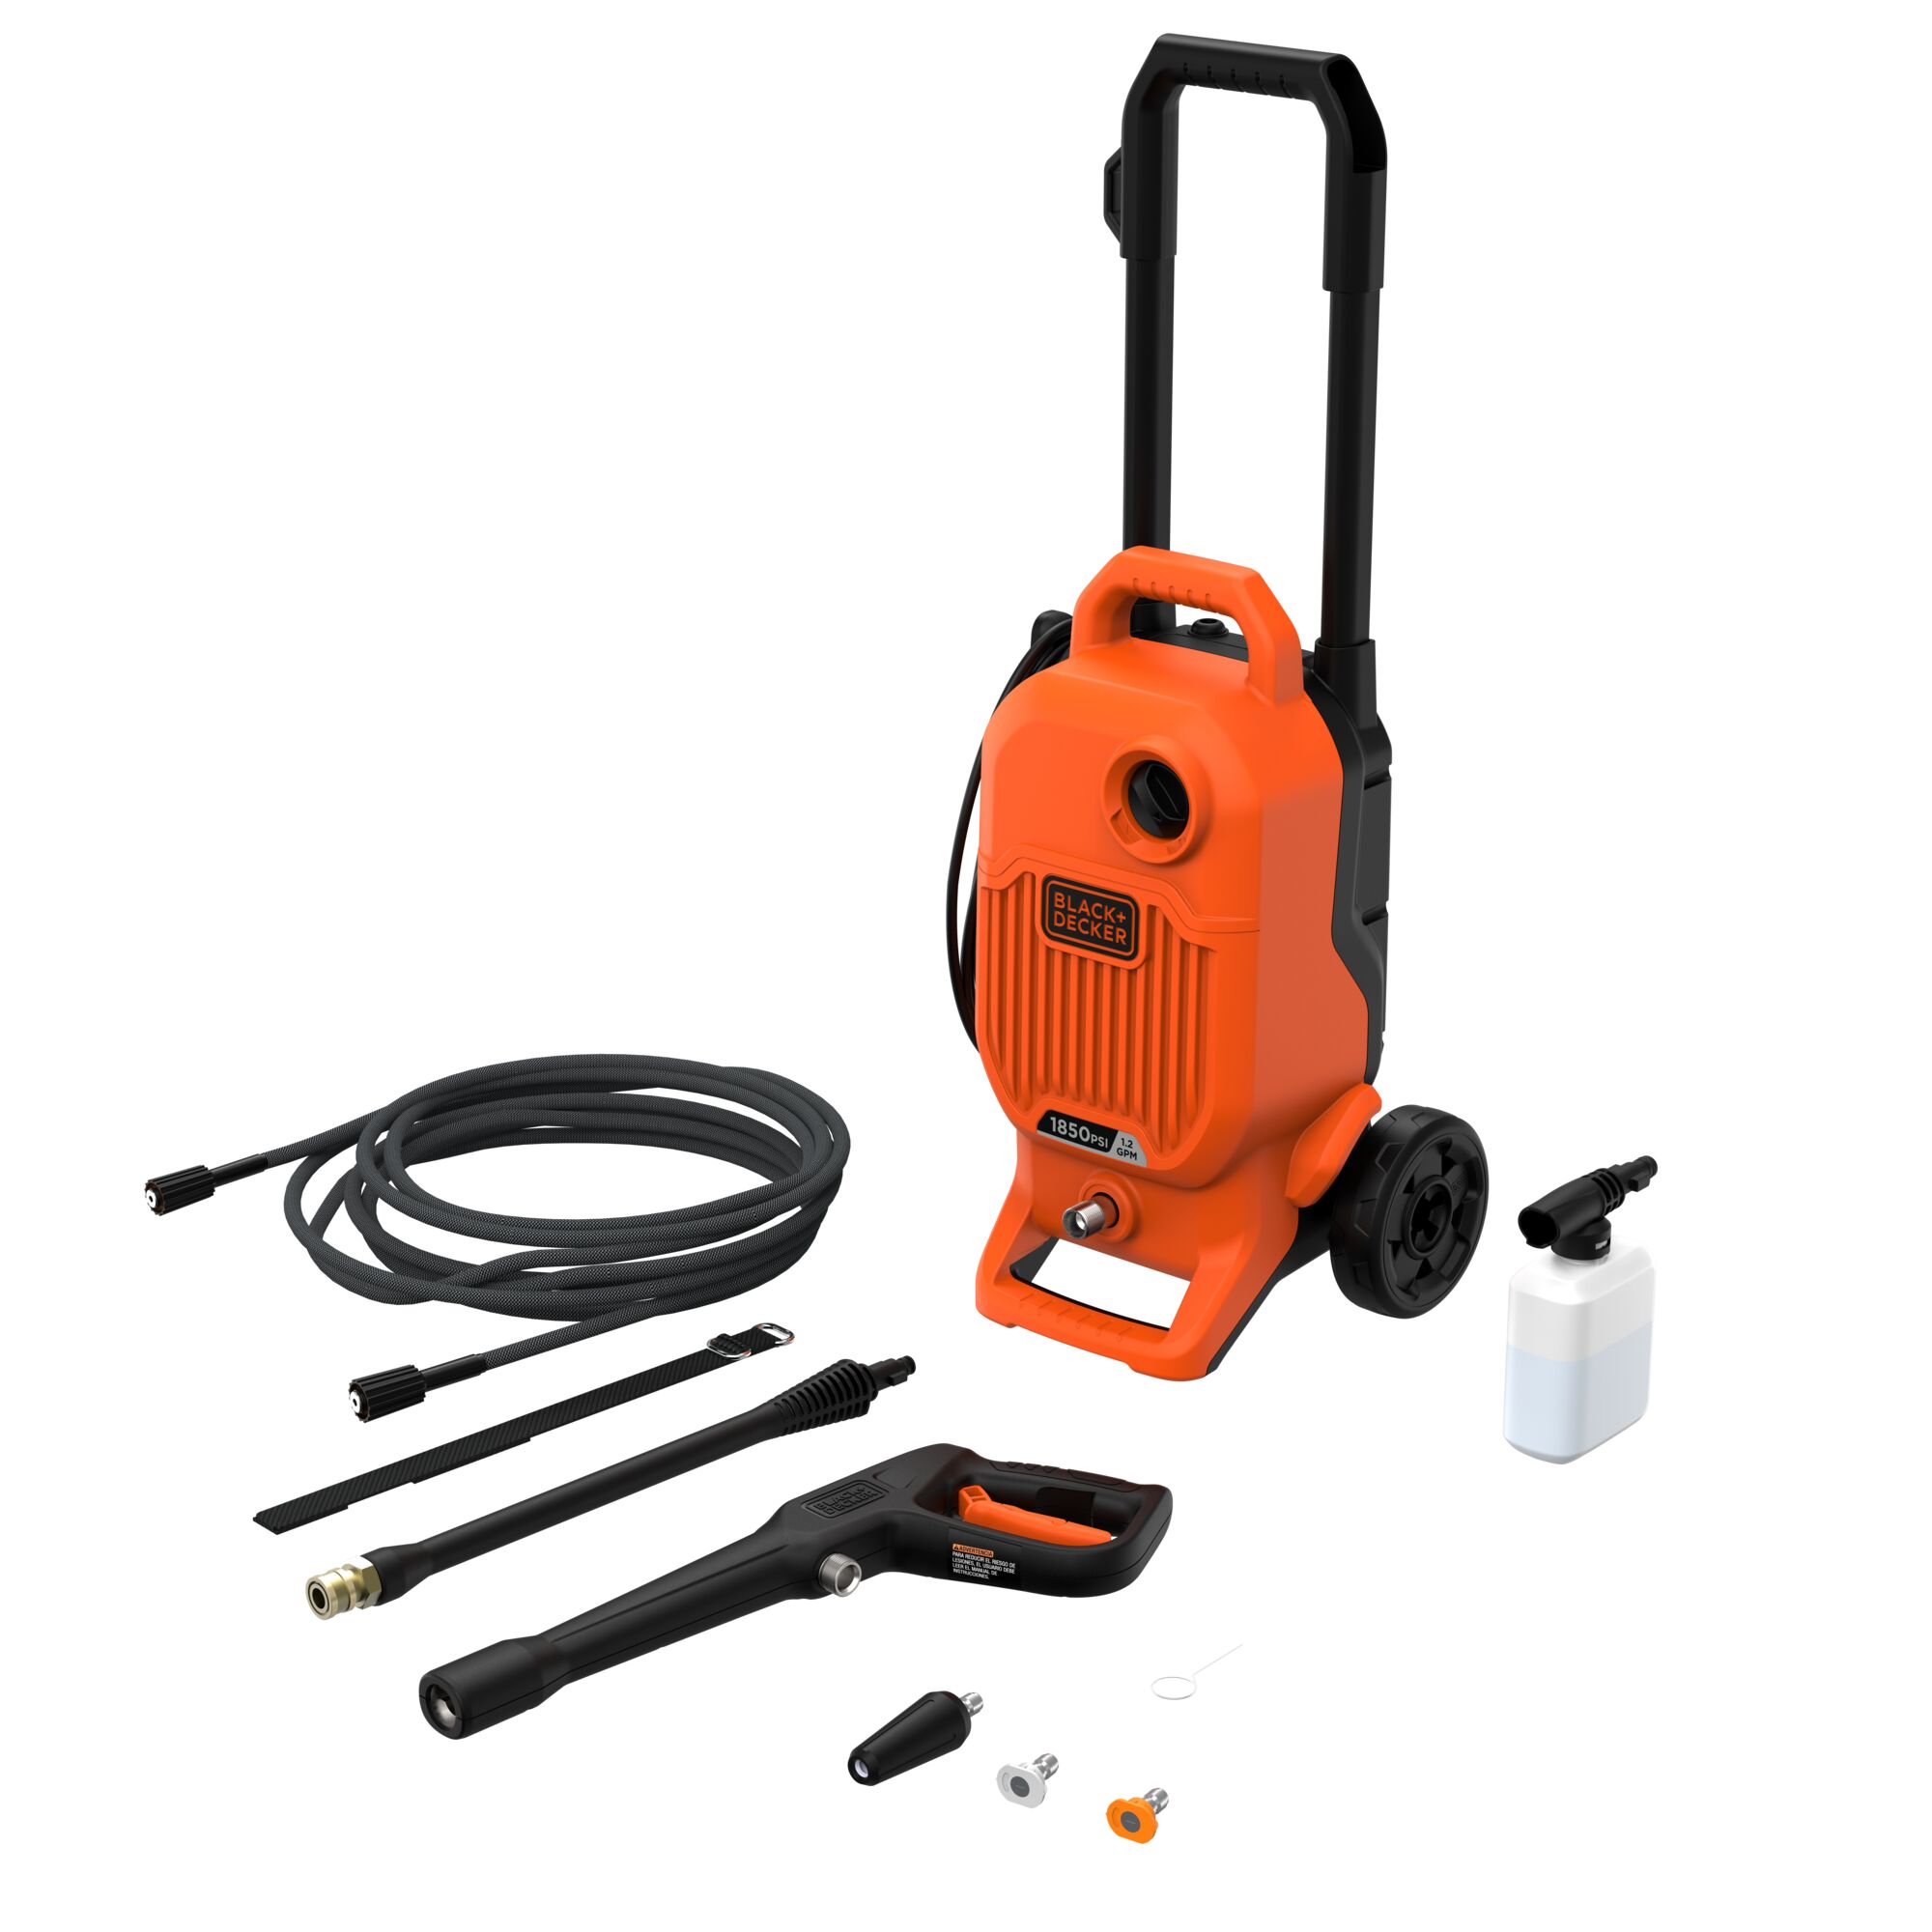 1850 PSI, 1.2 gpm, Electric Cold Water Pressure Washer